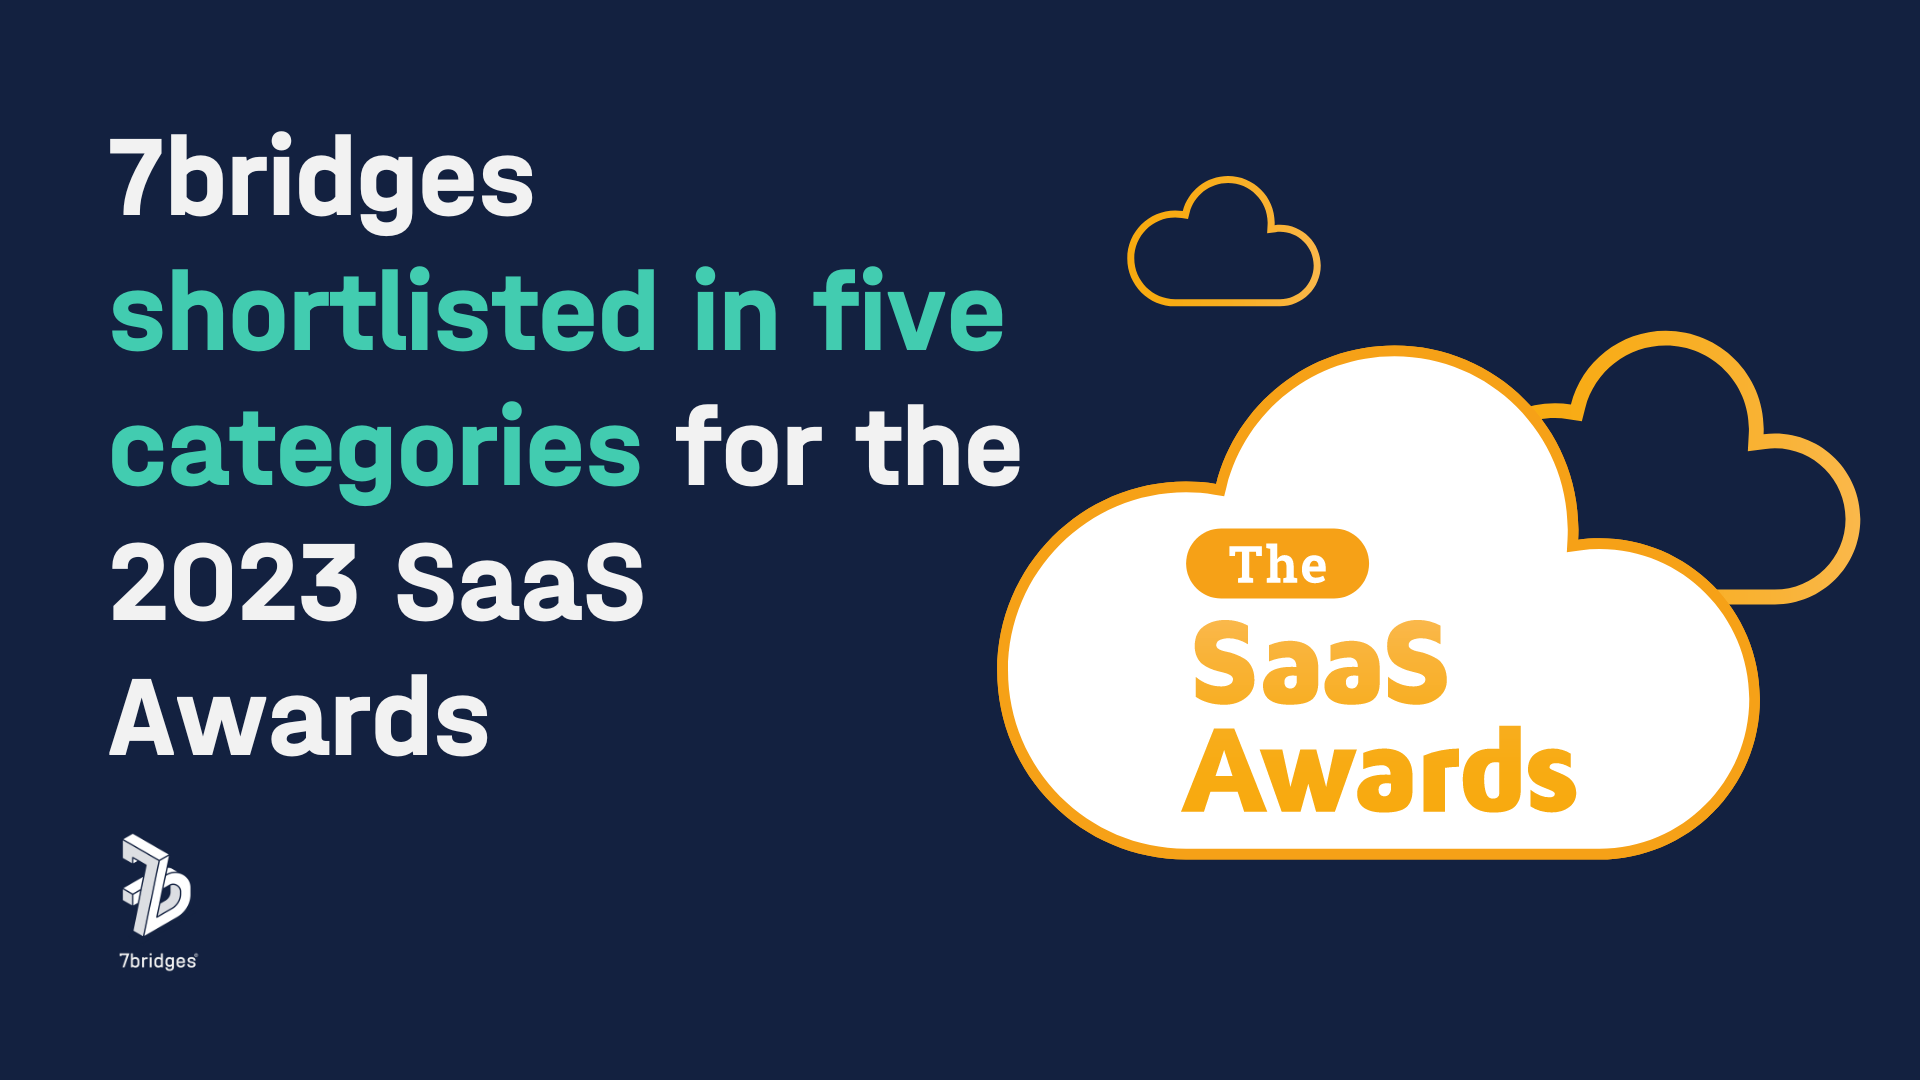 7bridges shortlisted in five categories in the 2023 SaaS Awards on blue with SaaS awards orange cloud logo to the right